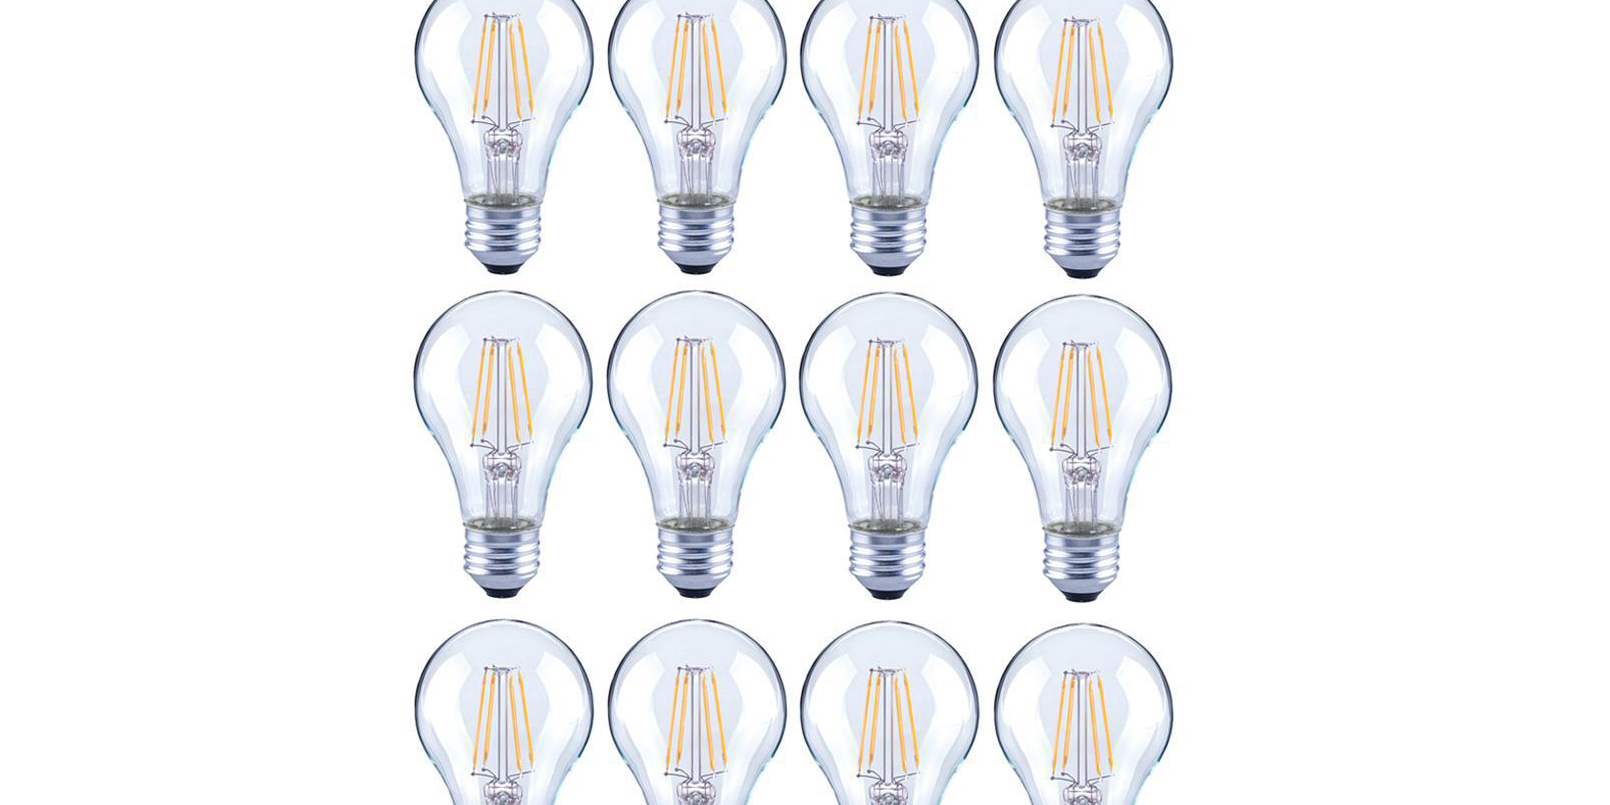 photo of Pick up 12 dimmable LED light bulbs for $11 in today’s Green Deals, more image